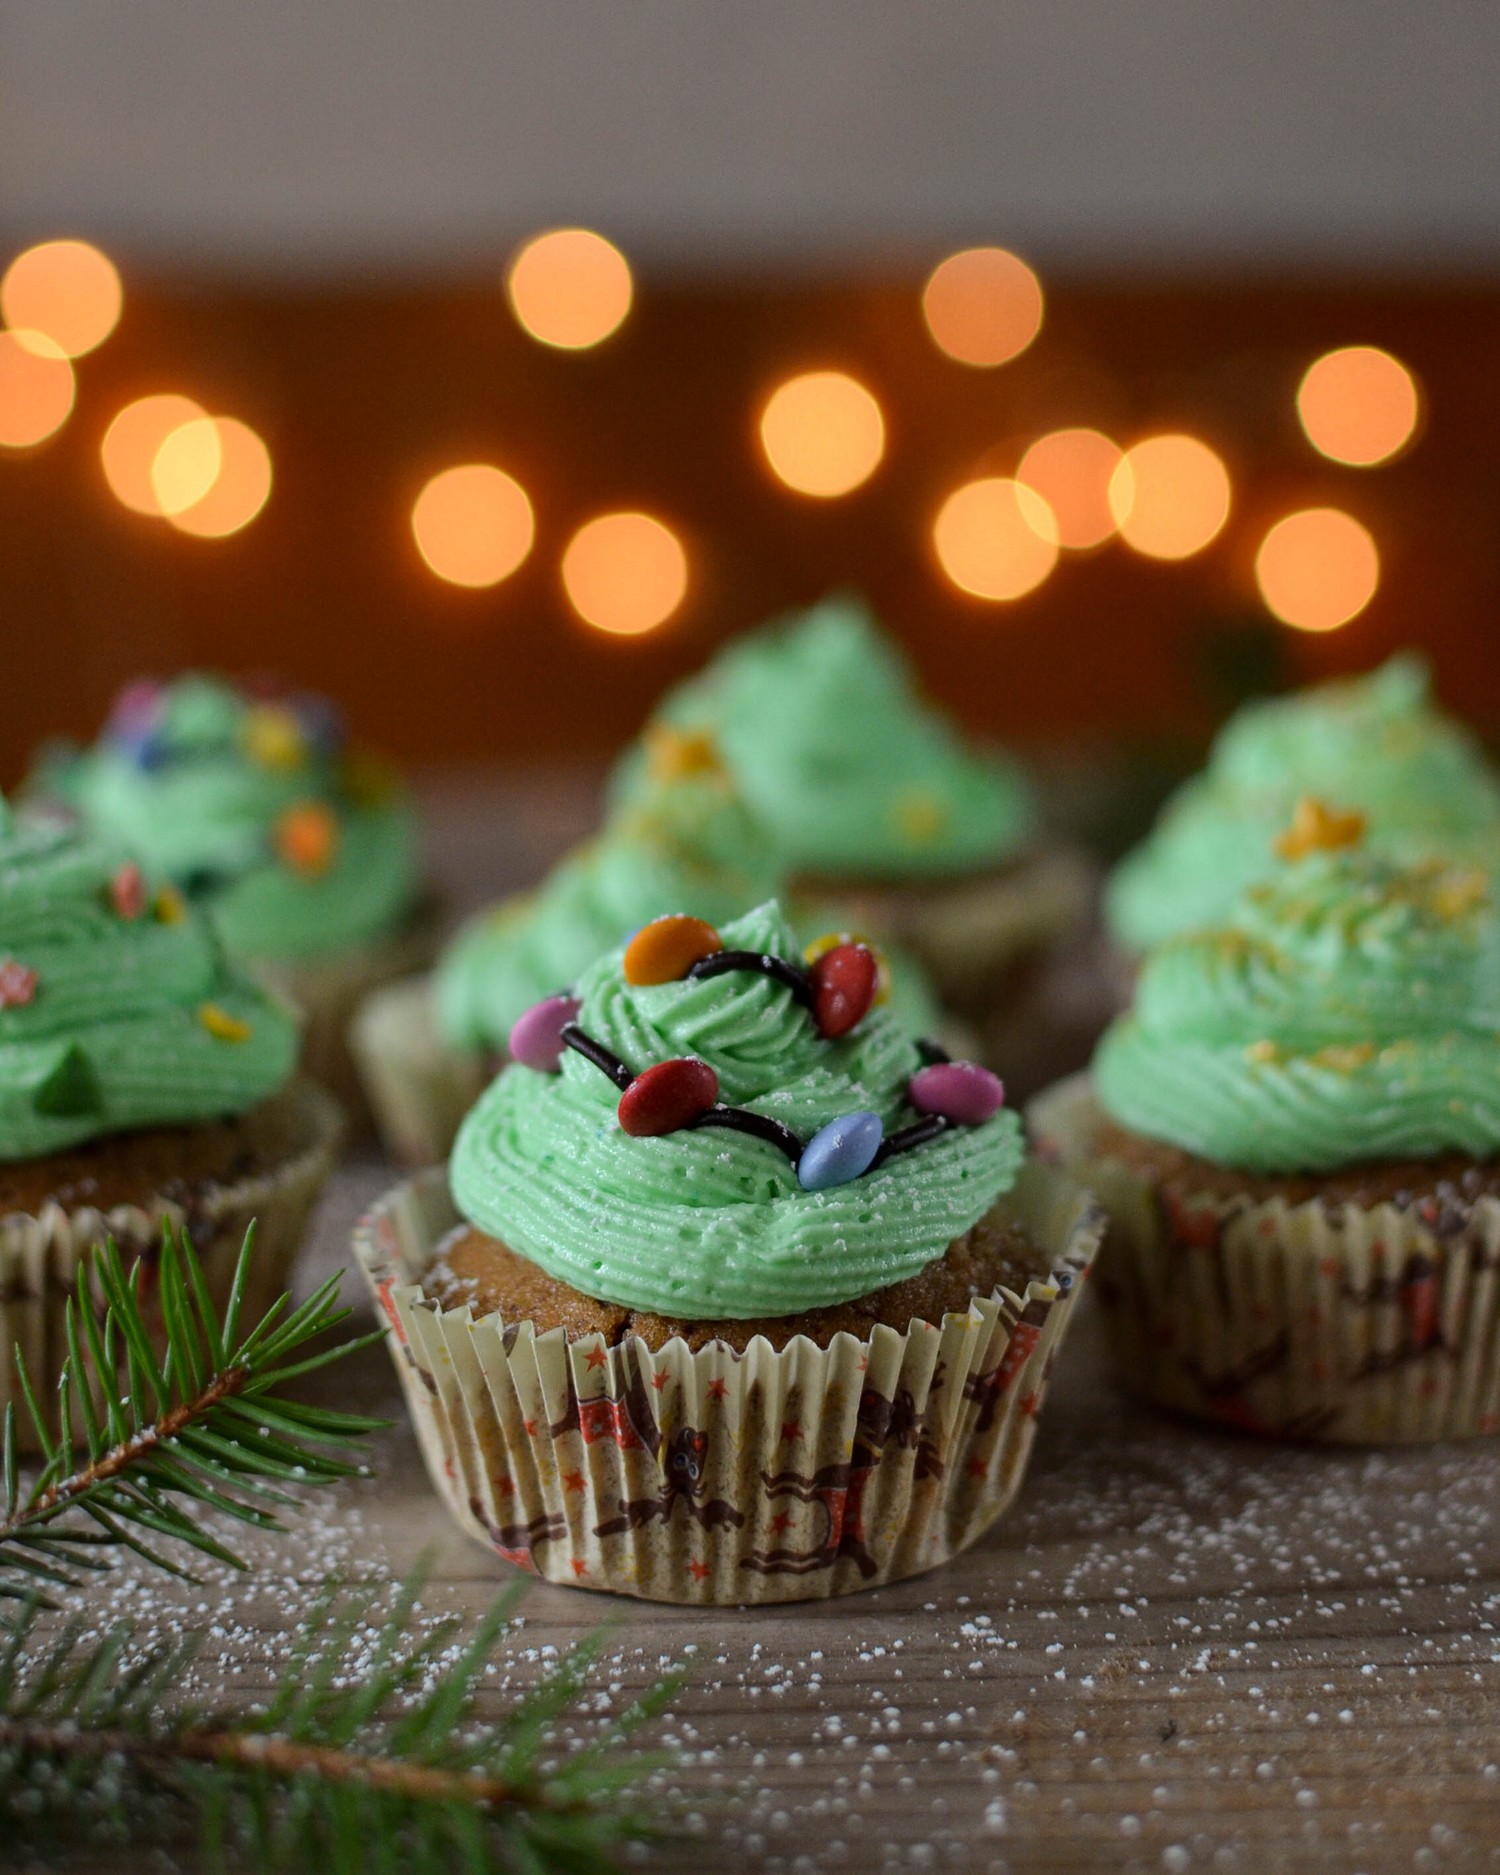 What to Bake for Christmas (4 Easy Festive Desserts)